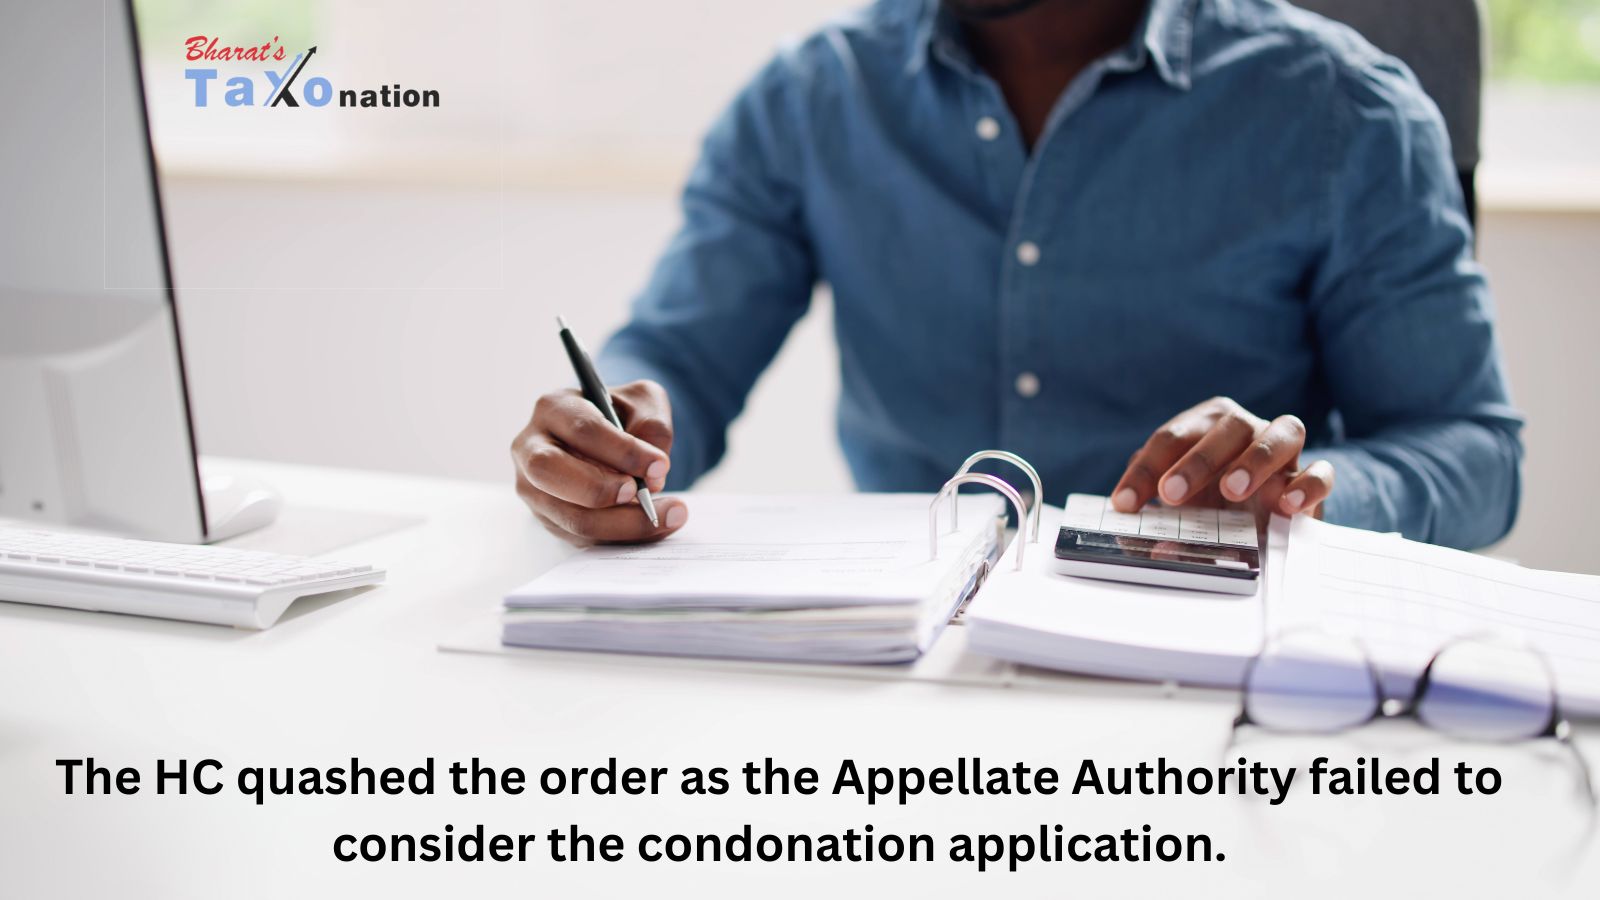 The High Court overturned the order because the Appellate Authority improperly exercised its jurisdiction by neglecting to address the application for condonation of delay.